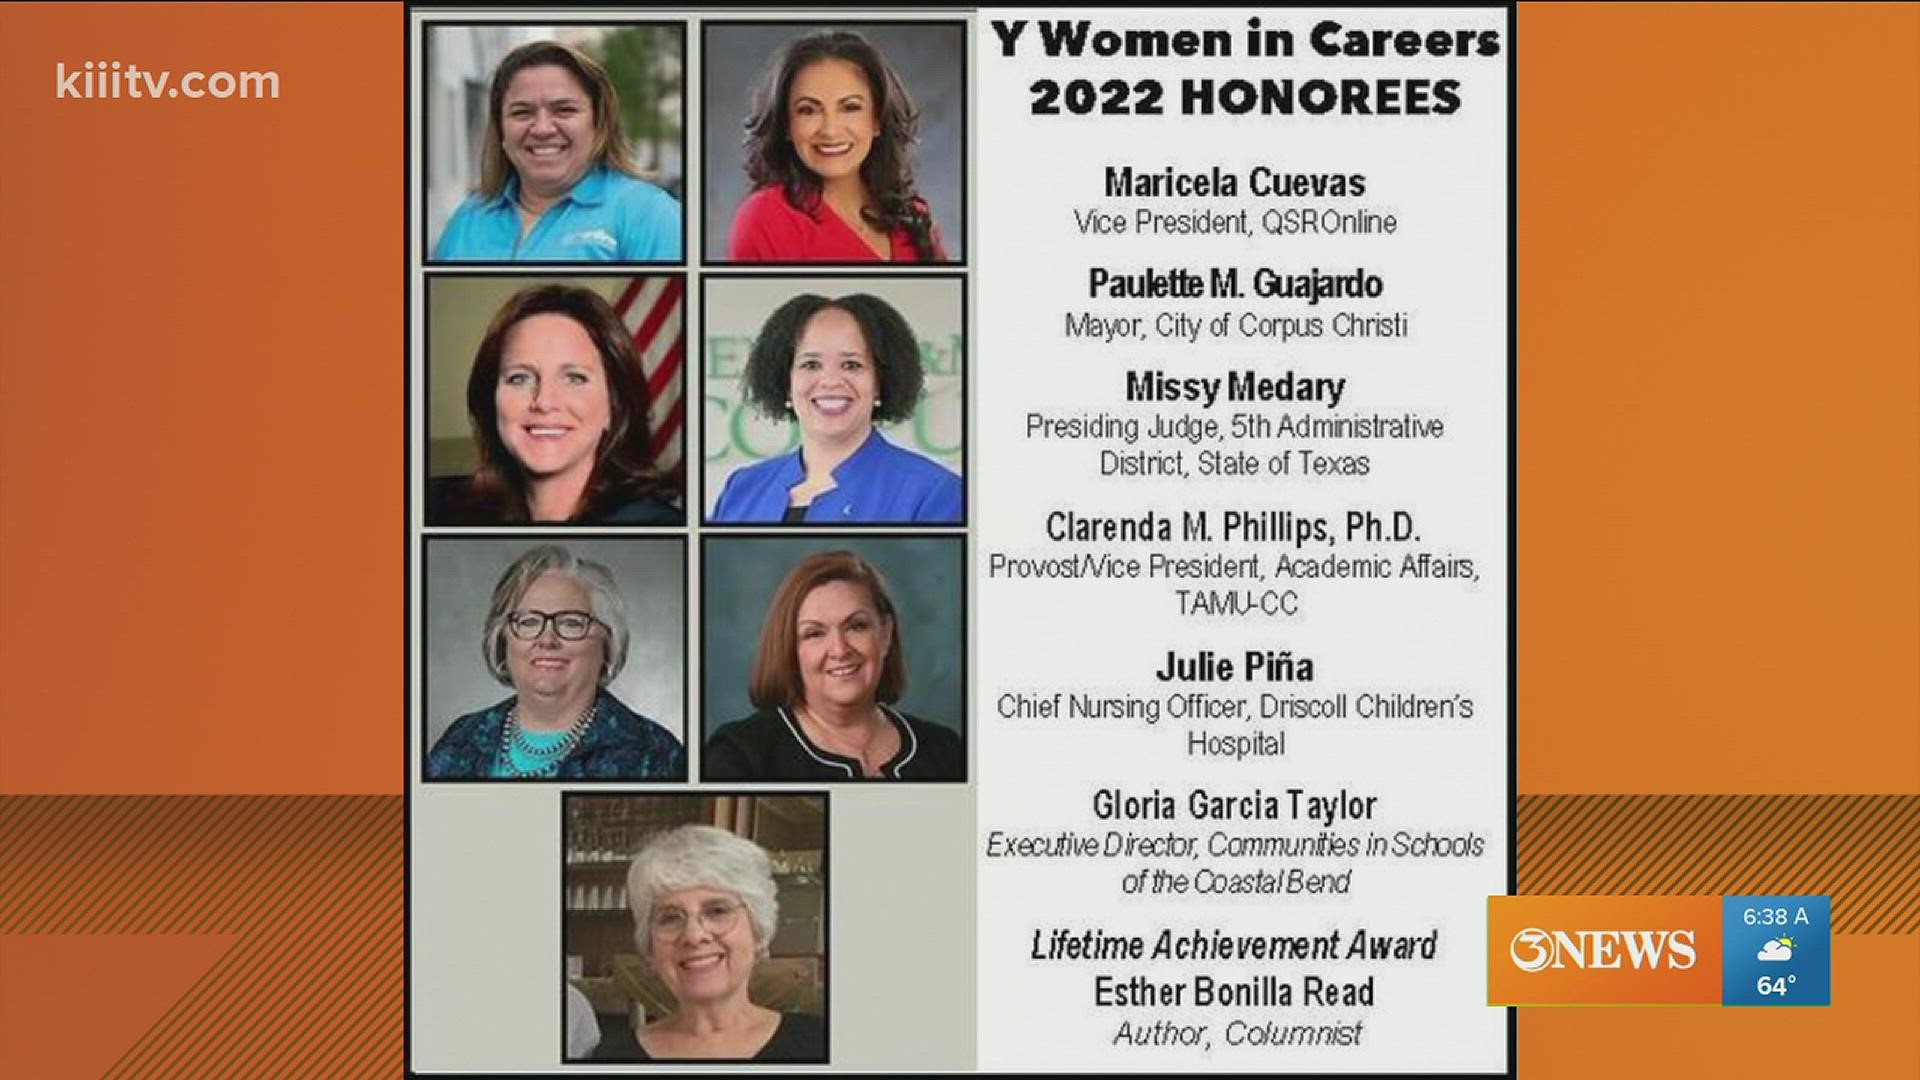 The Y-Women in Careers Awards are coming up!